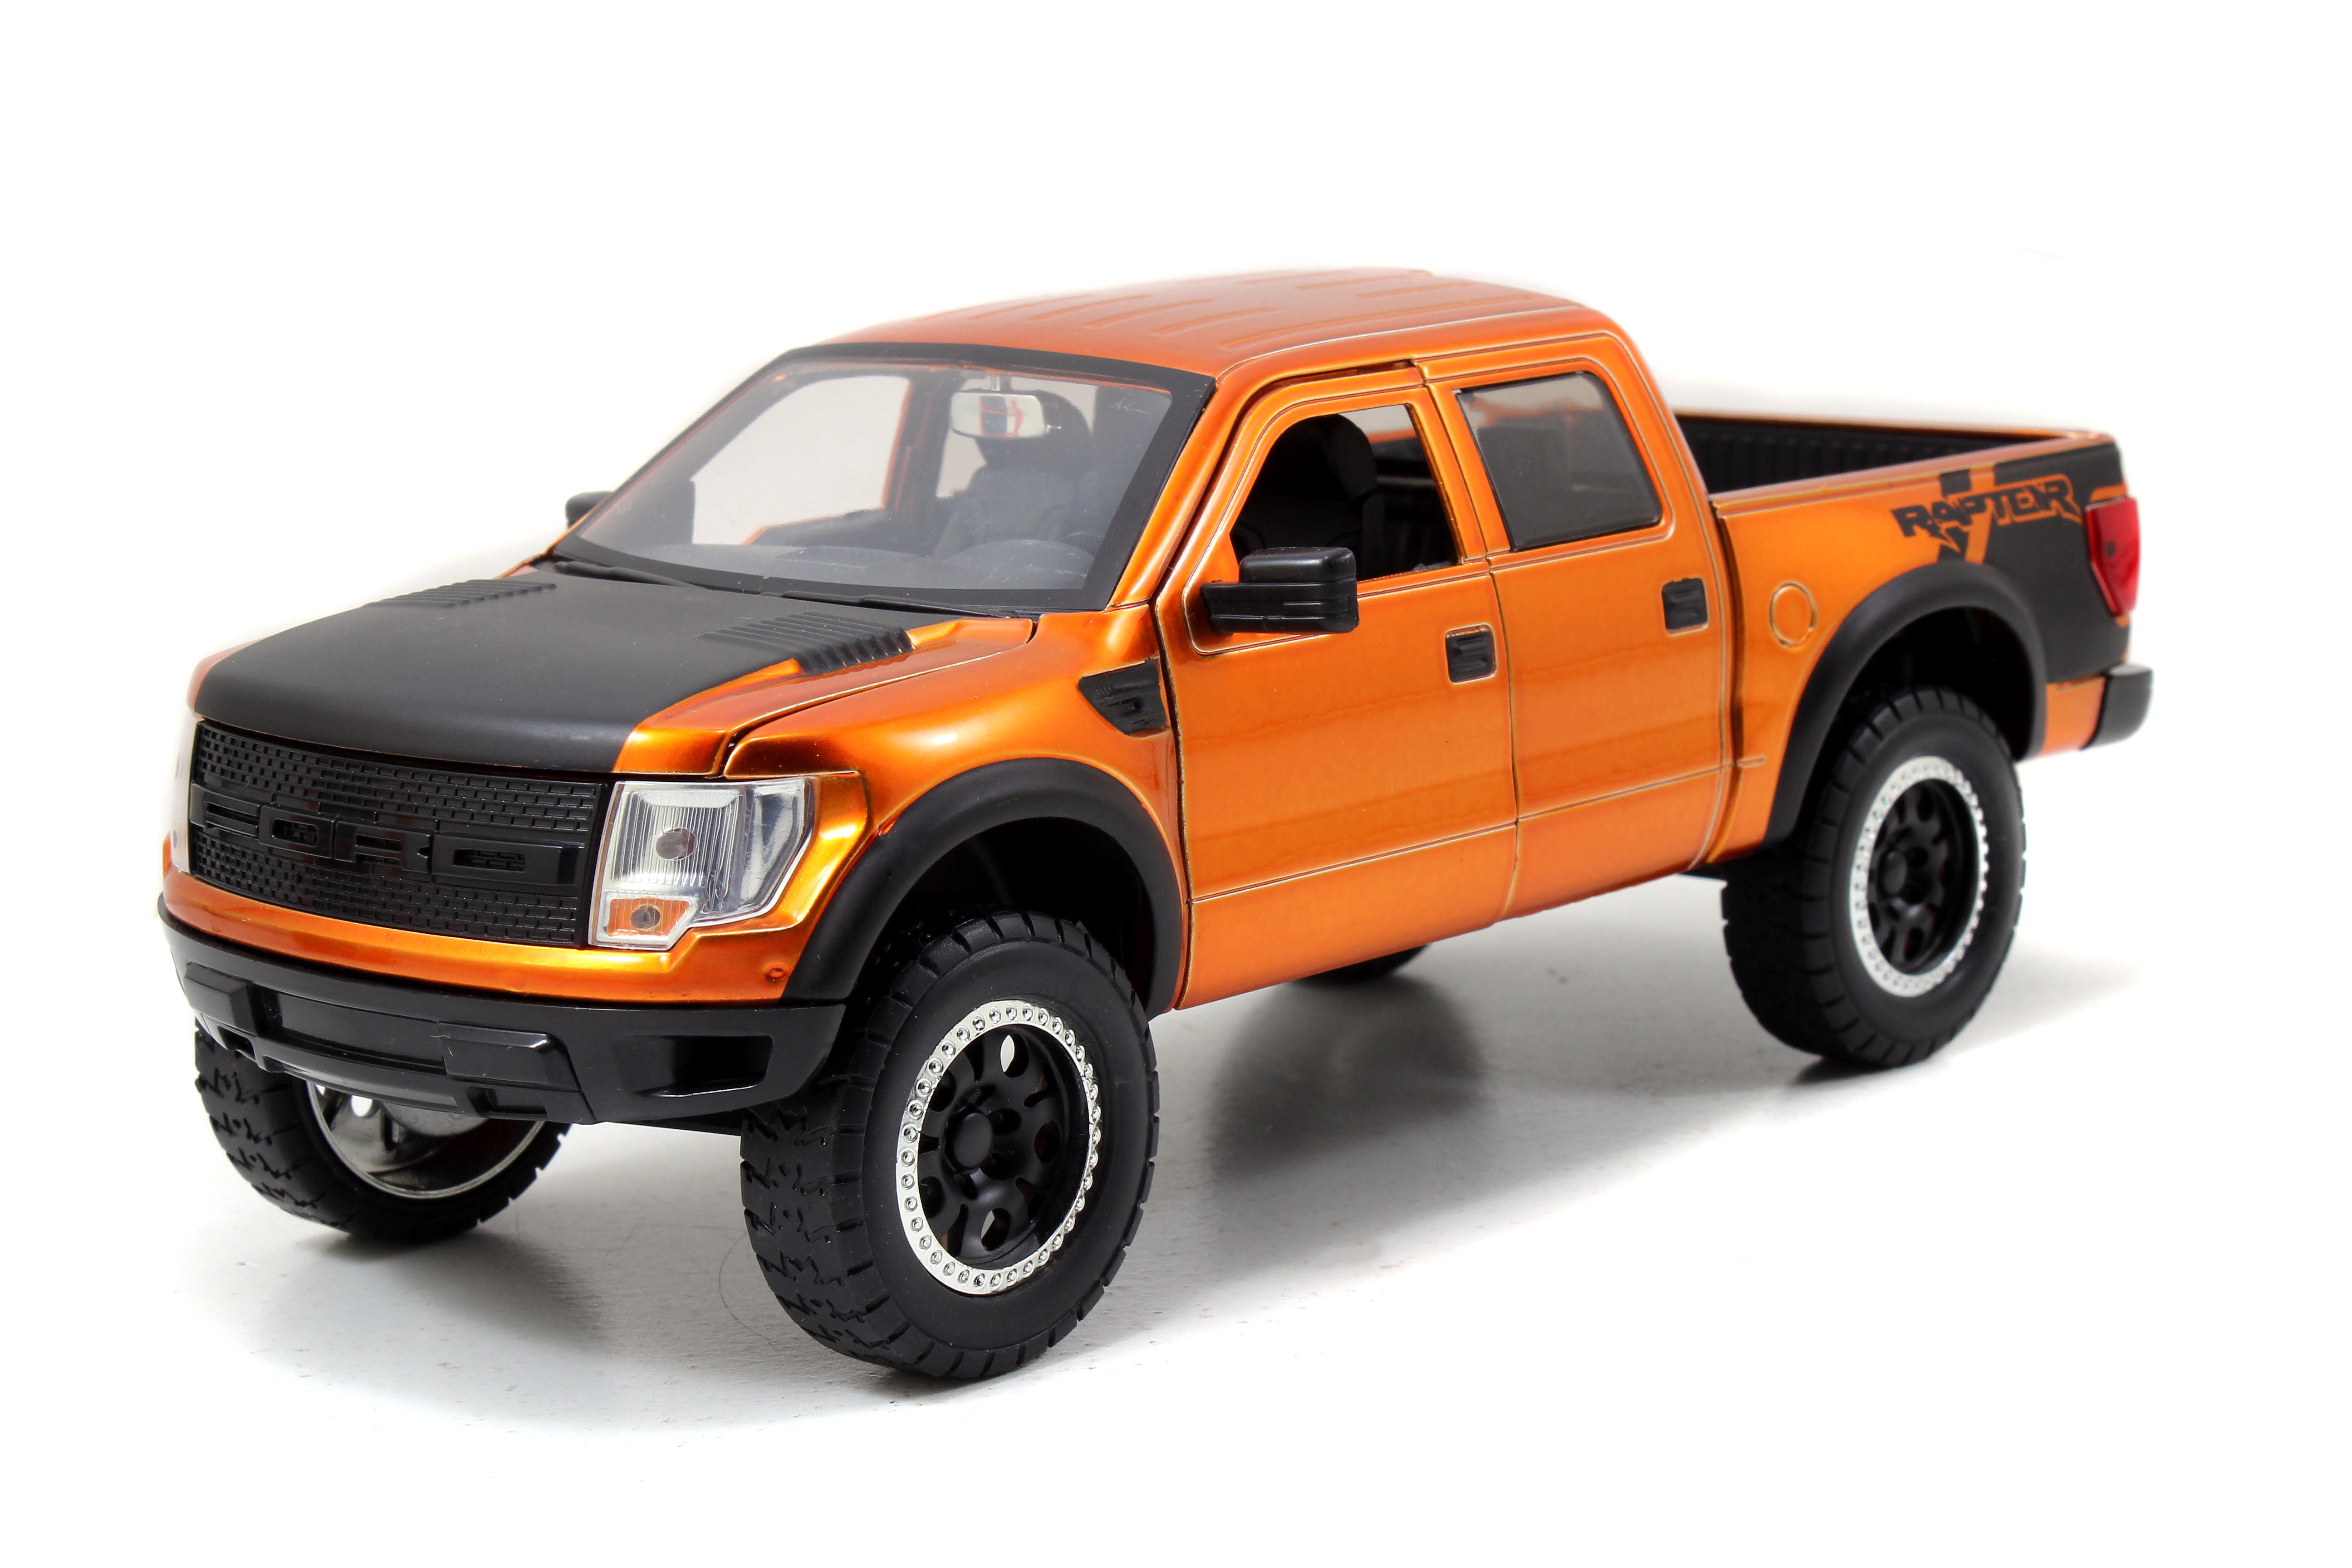 Just Trucks 1:24 2011 Ford F-150 SVT Raptor Die-cast Car with Tire